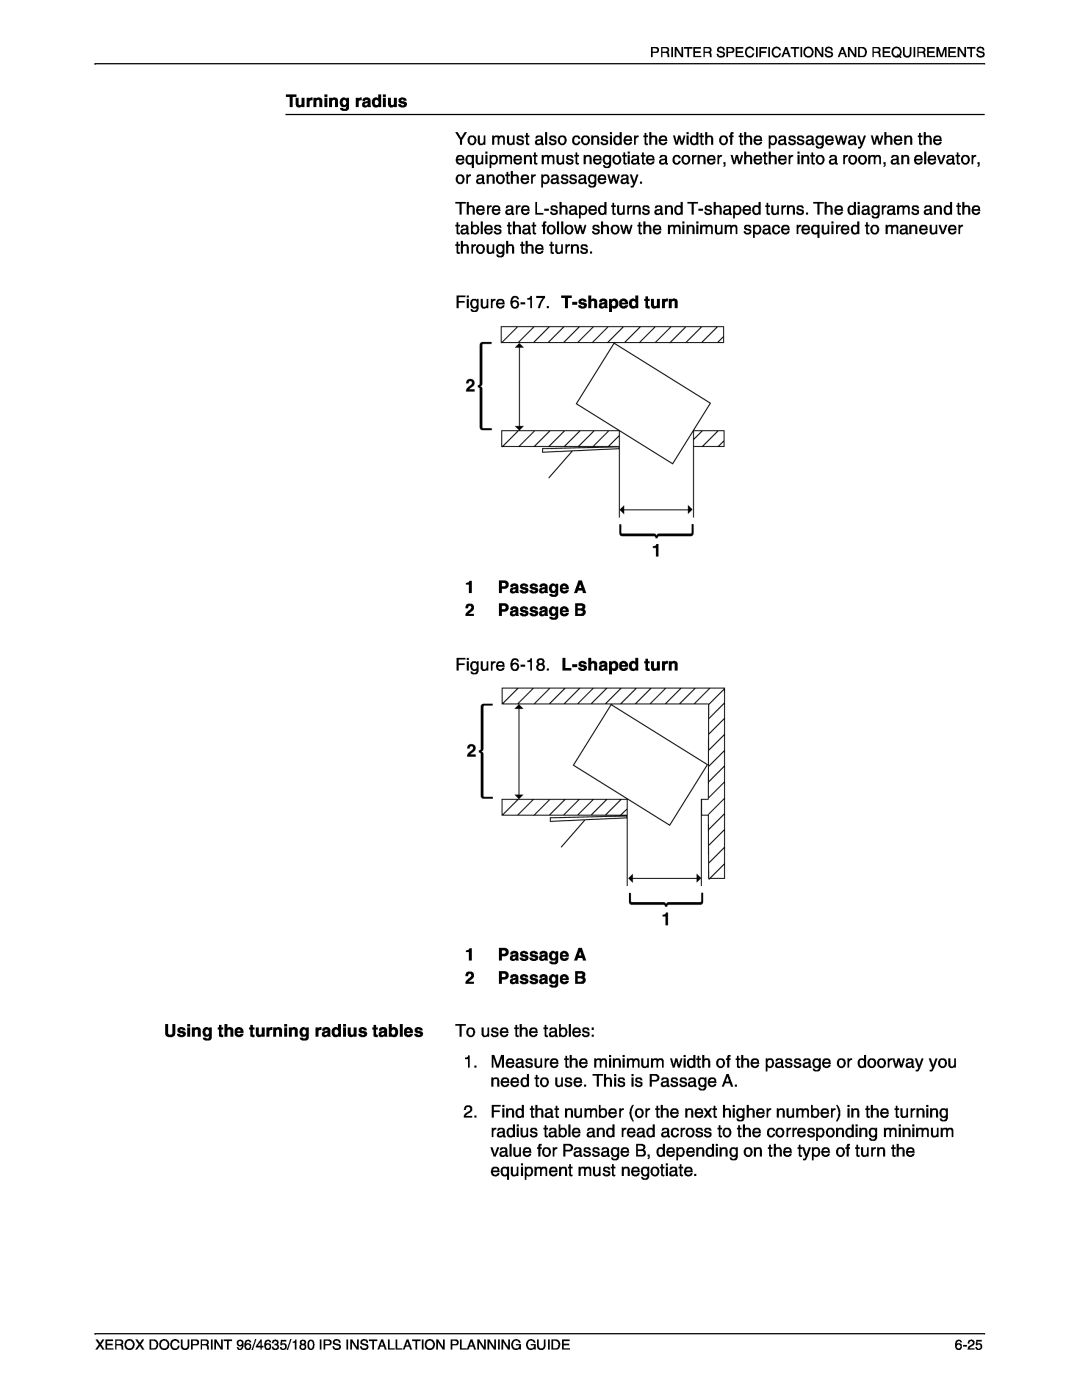 Xerox 180 IPS manual Turning radius, 1Passage A 2Passage B, Using the turning radius tables, To use the tables 